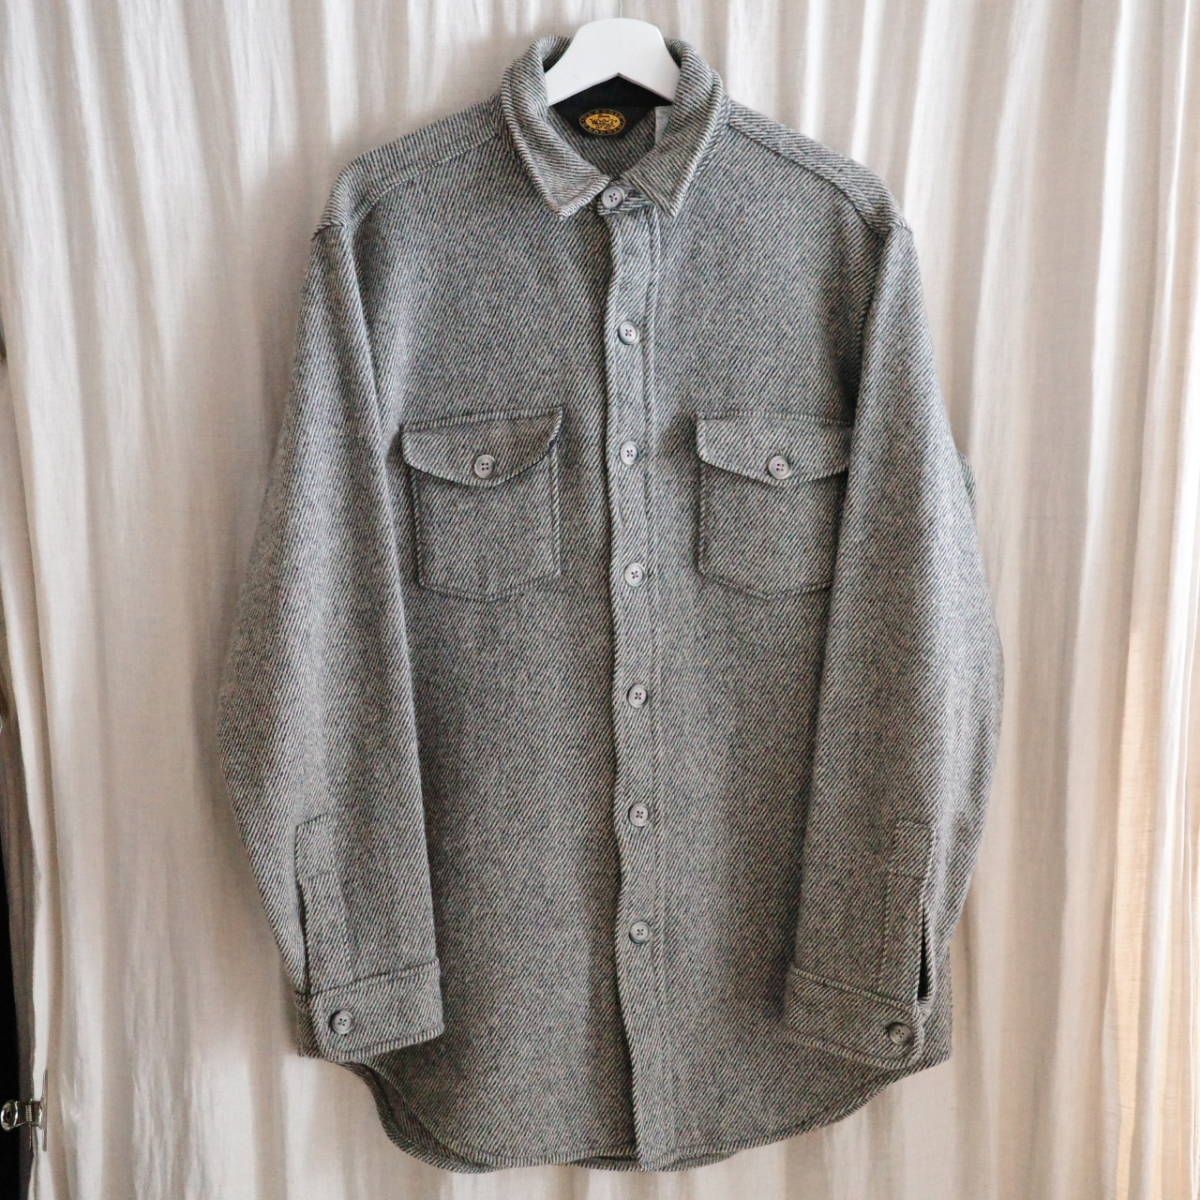 Vintage Woolrich wool shirt jacket MADE IN USA Lサイズ表記 ウールリッチ CPOシャツ